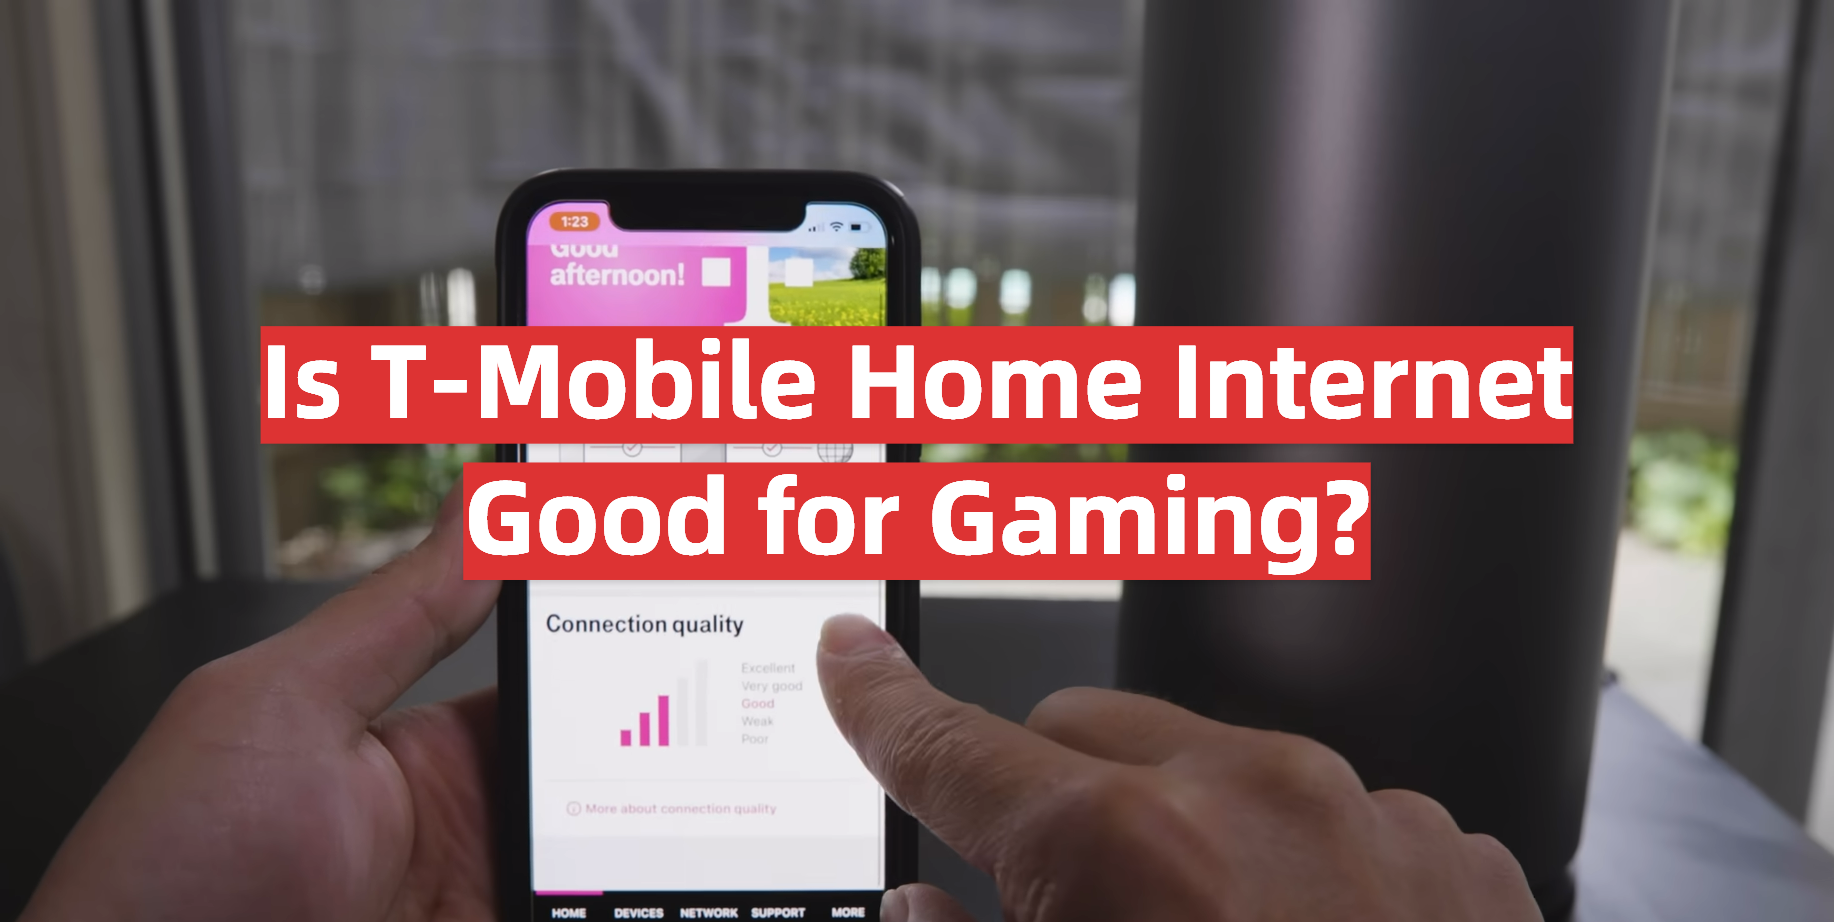 T mobile home internet gaming